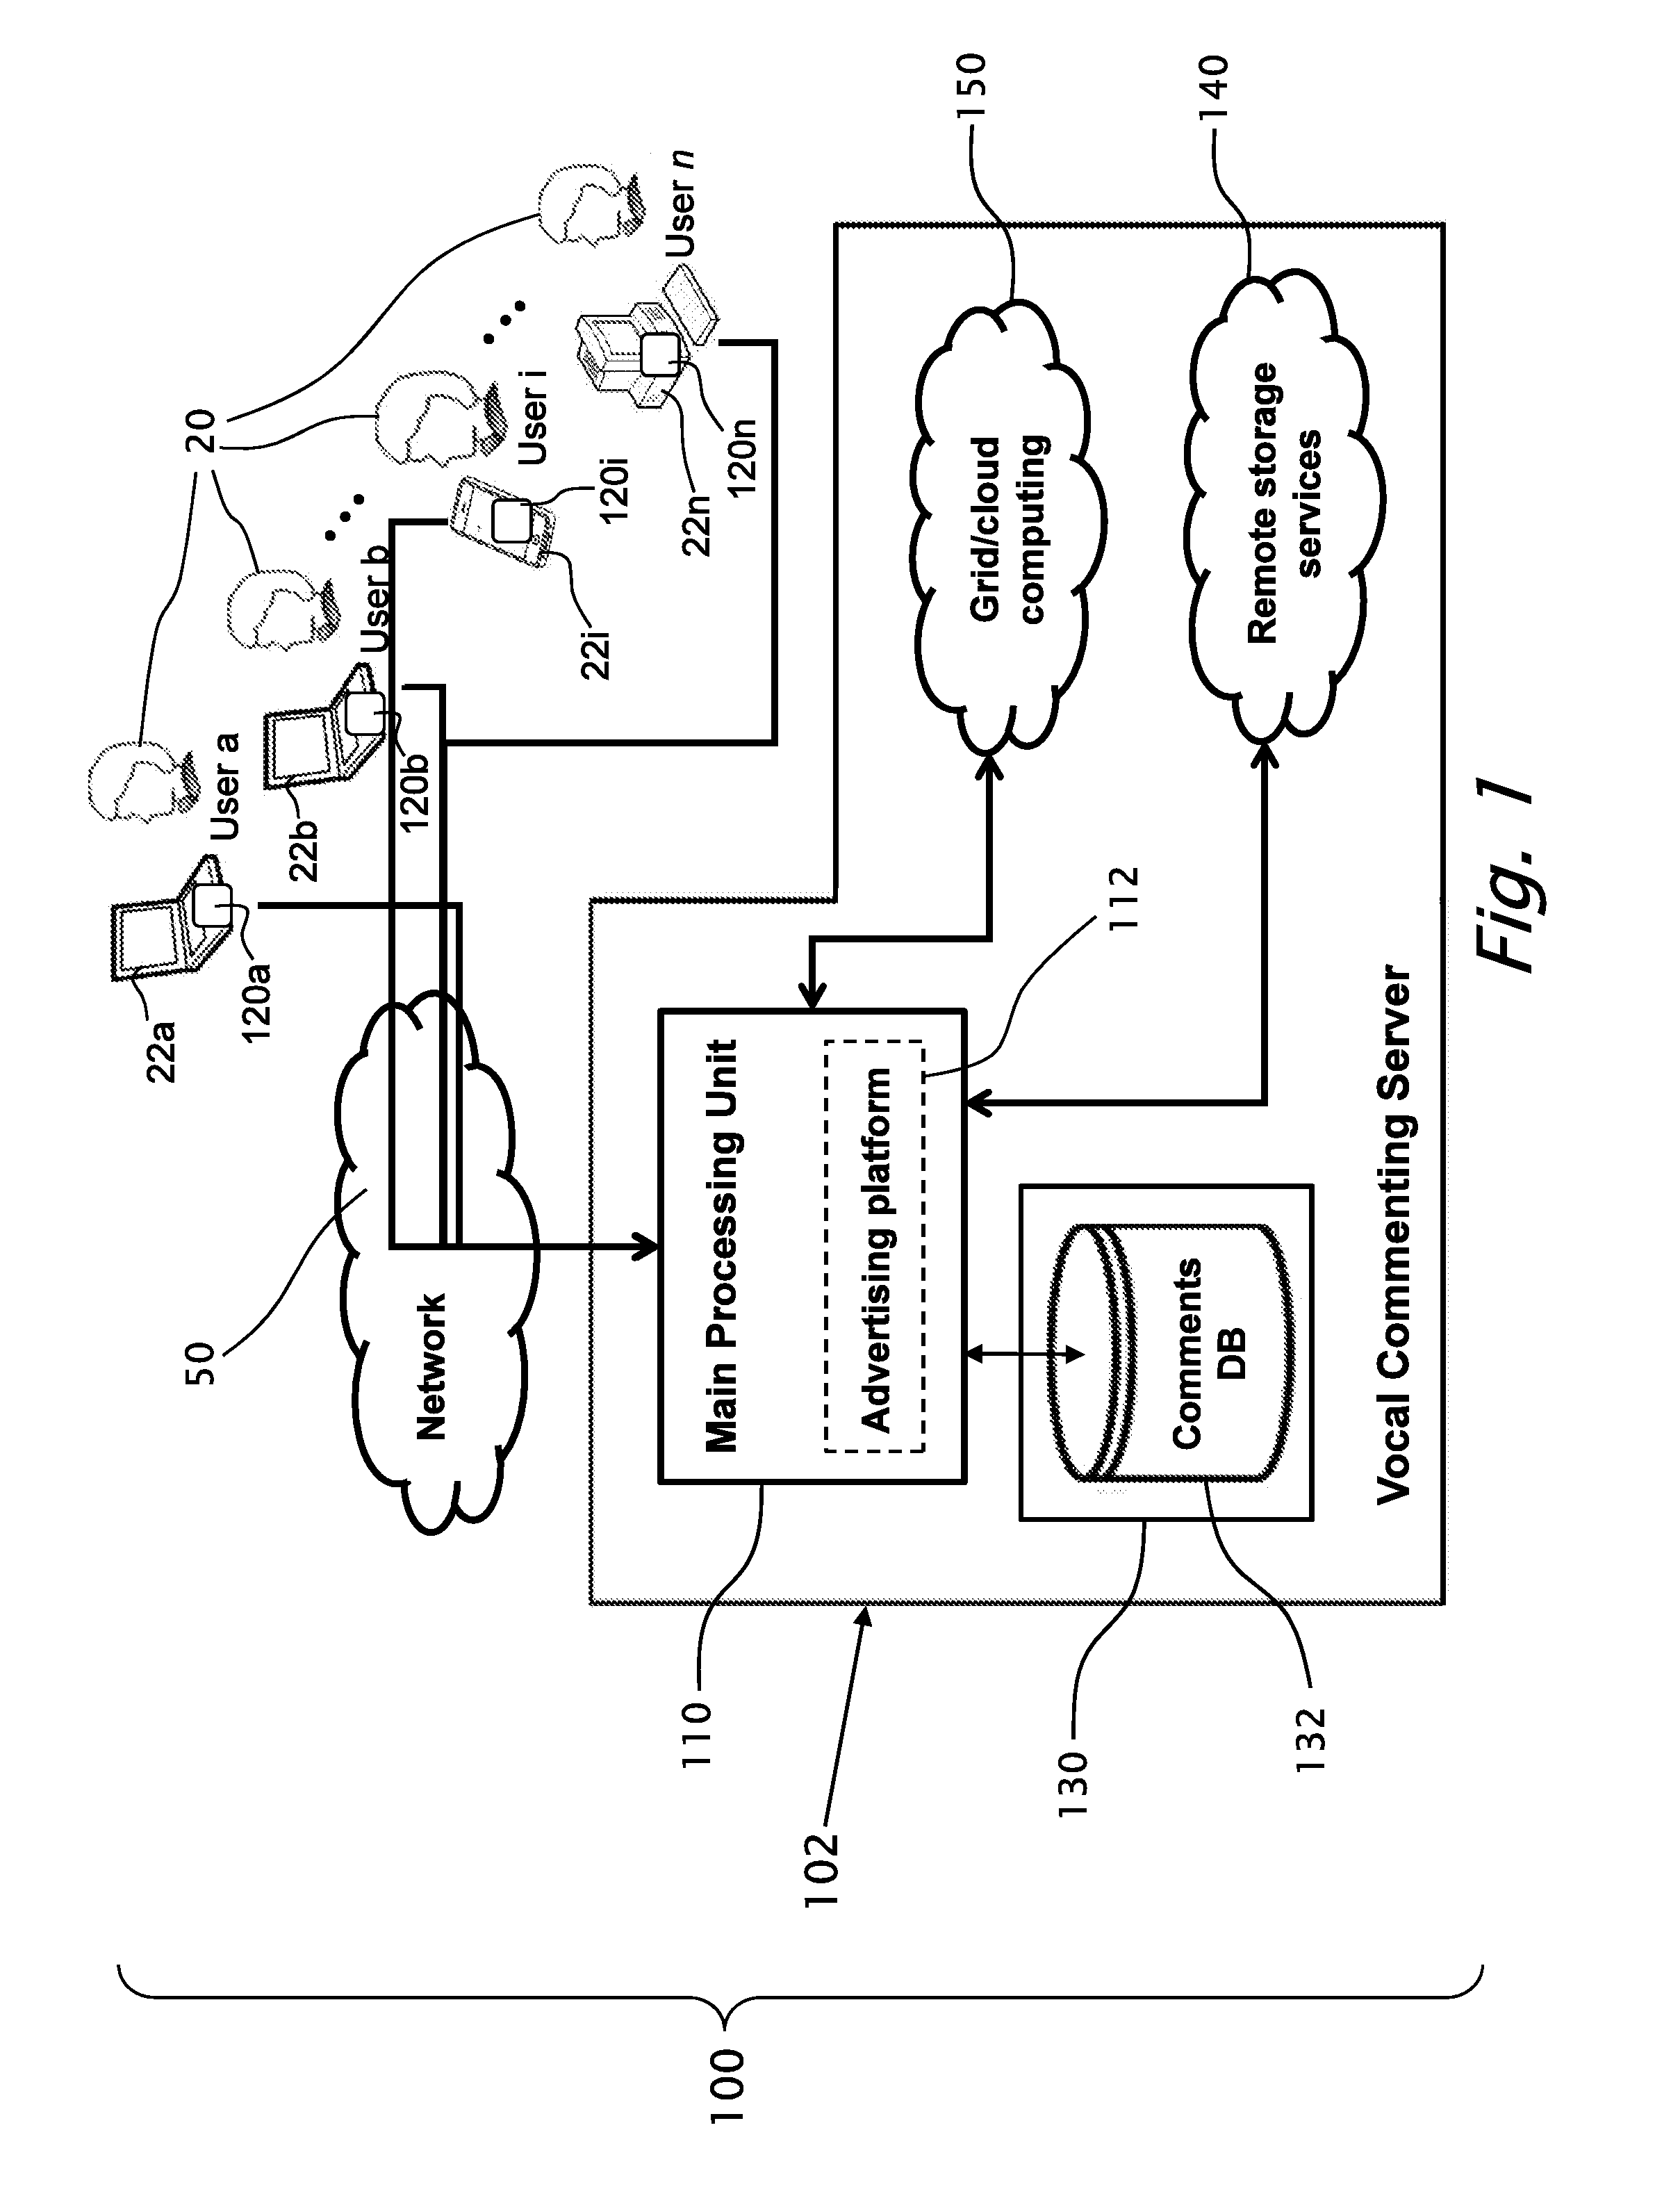 System and methods for vocal commenting on selected web pages